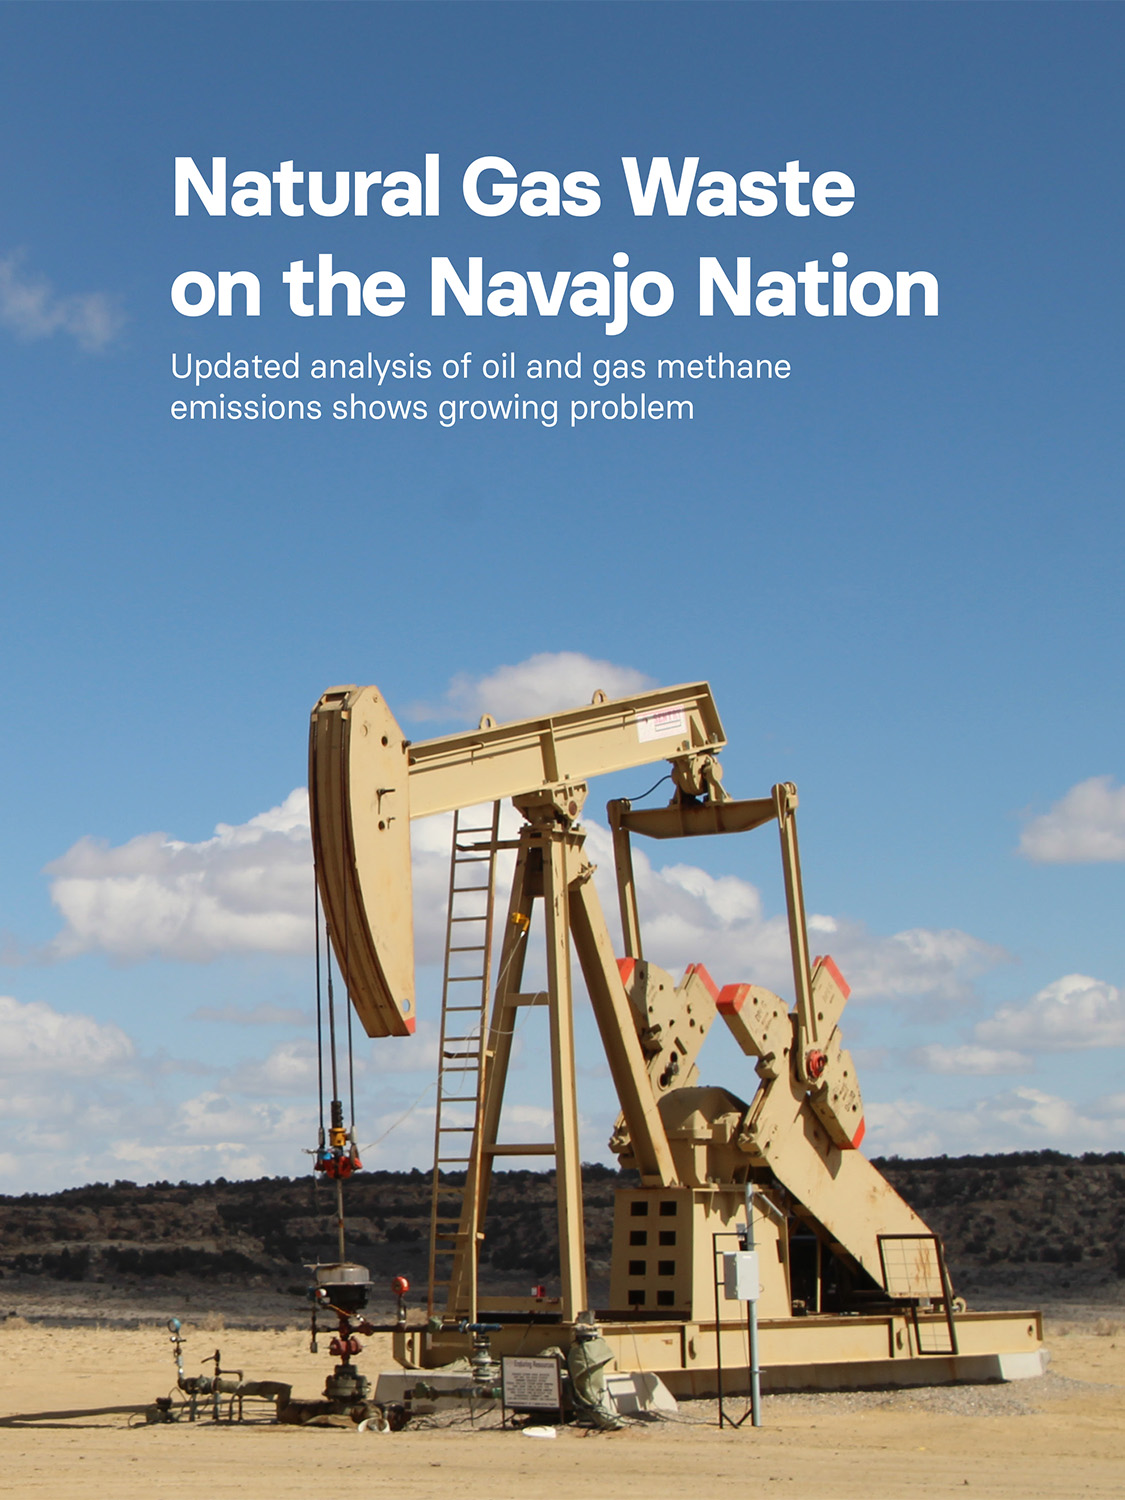 Methane emissions on the Navajo Nation